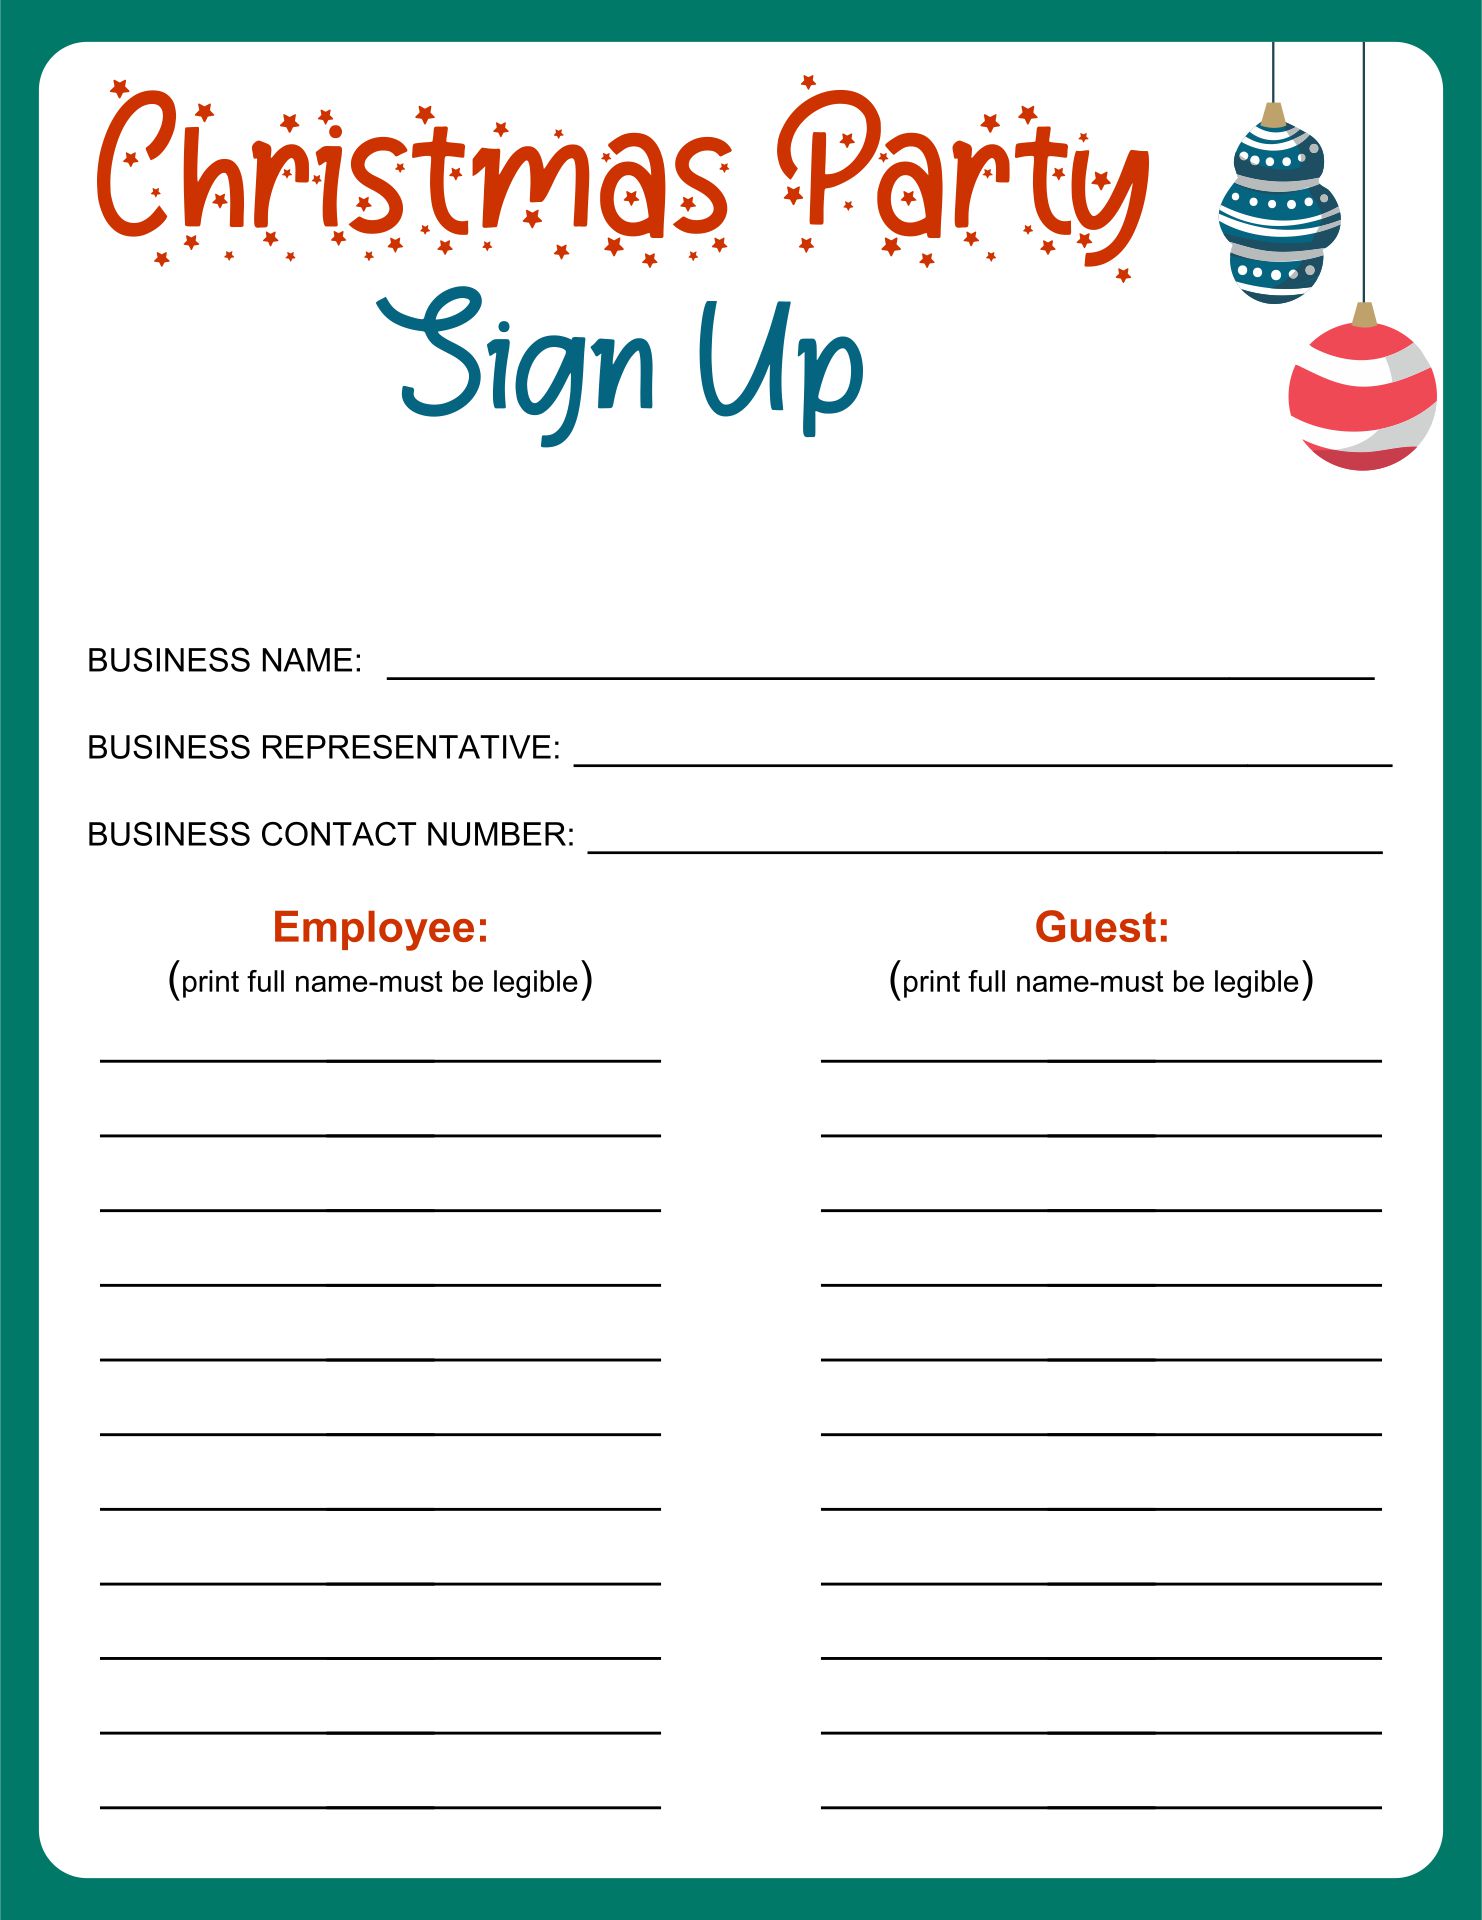 Christmas Party Sign Up Sheet Printable Christmas Party Rustic Sexiz Pix